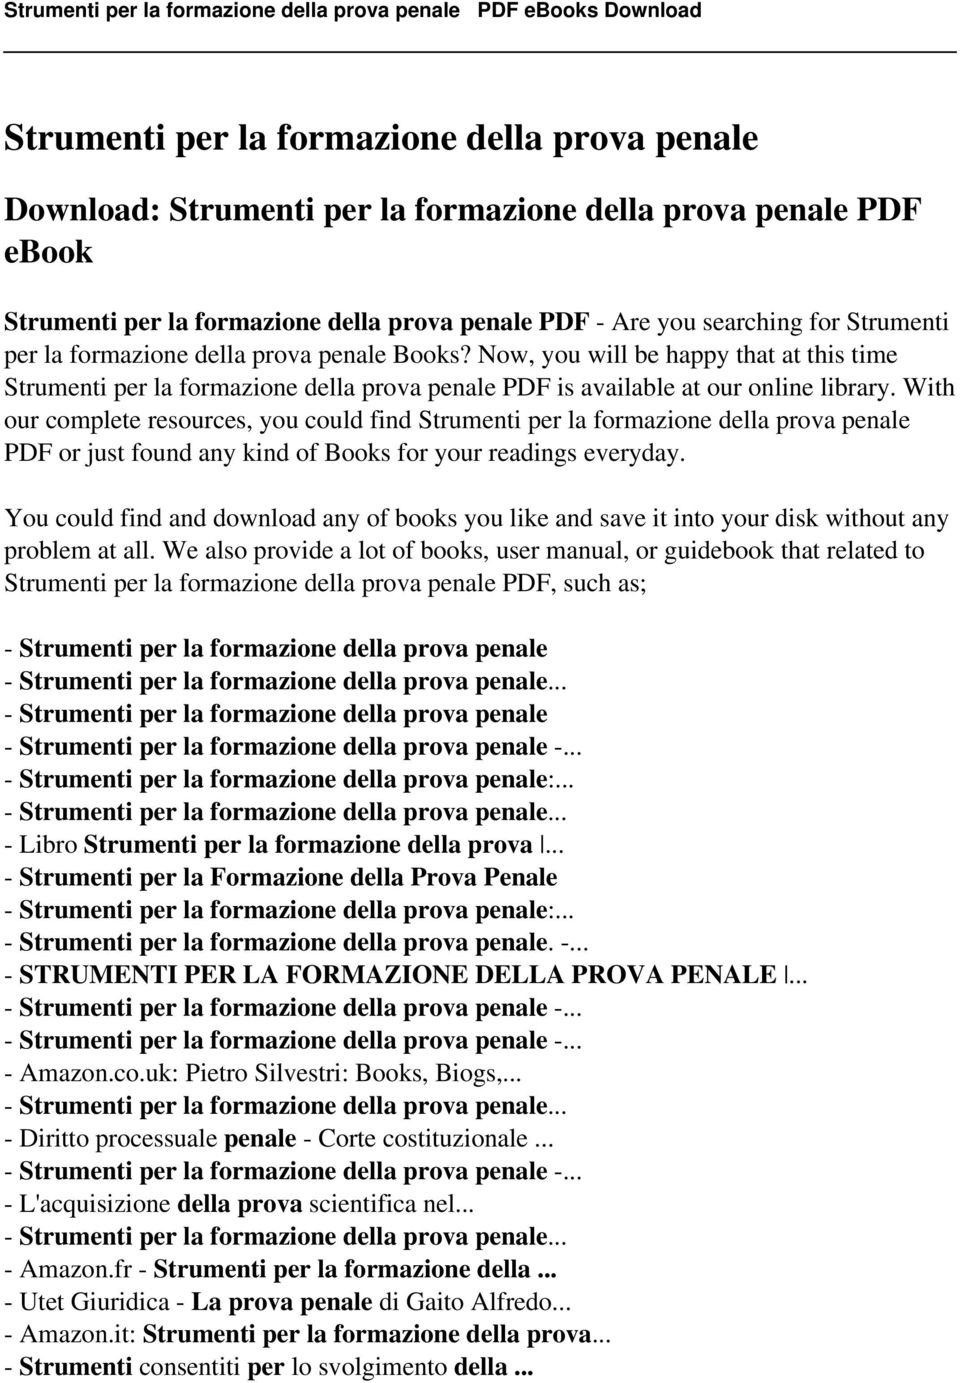 With our complete resources, you could find Strumenti per la formazione della prova penale PDF or just found any kind of Books for your readings everyday.